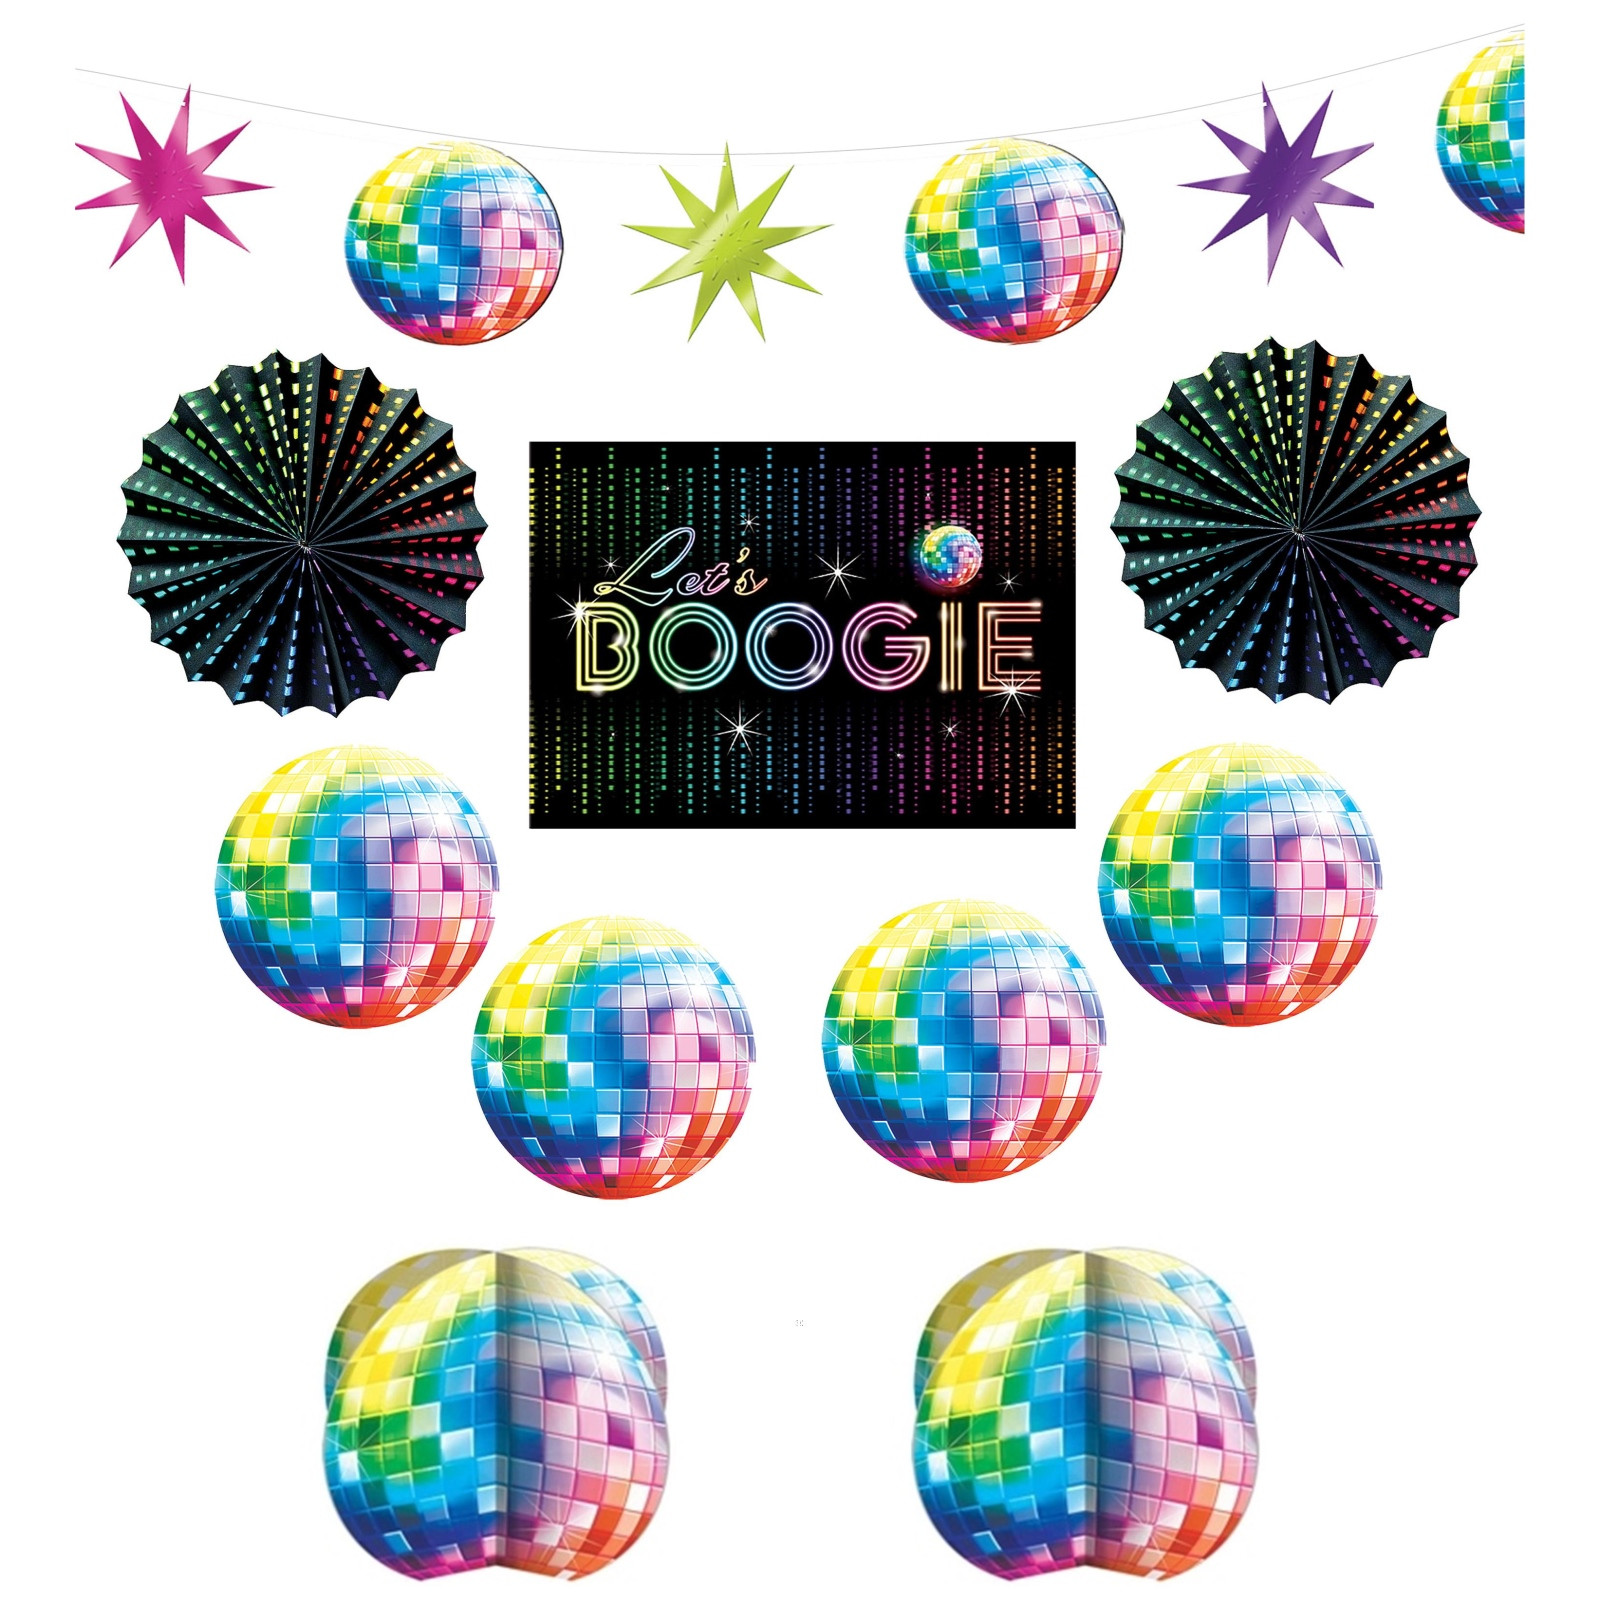 70'S Birthday Party Ideas
 DISCO FEVER 70 S PARTY SUPPLIES DECORATIONS 10 PC ROOM